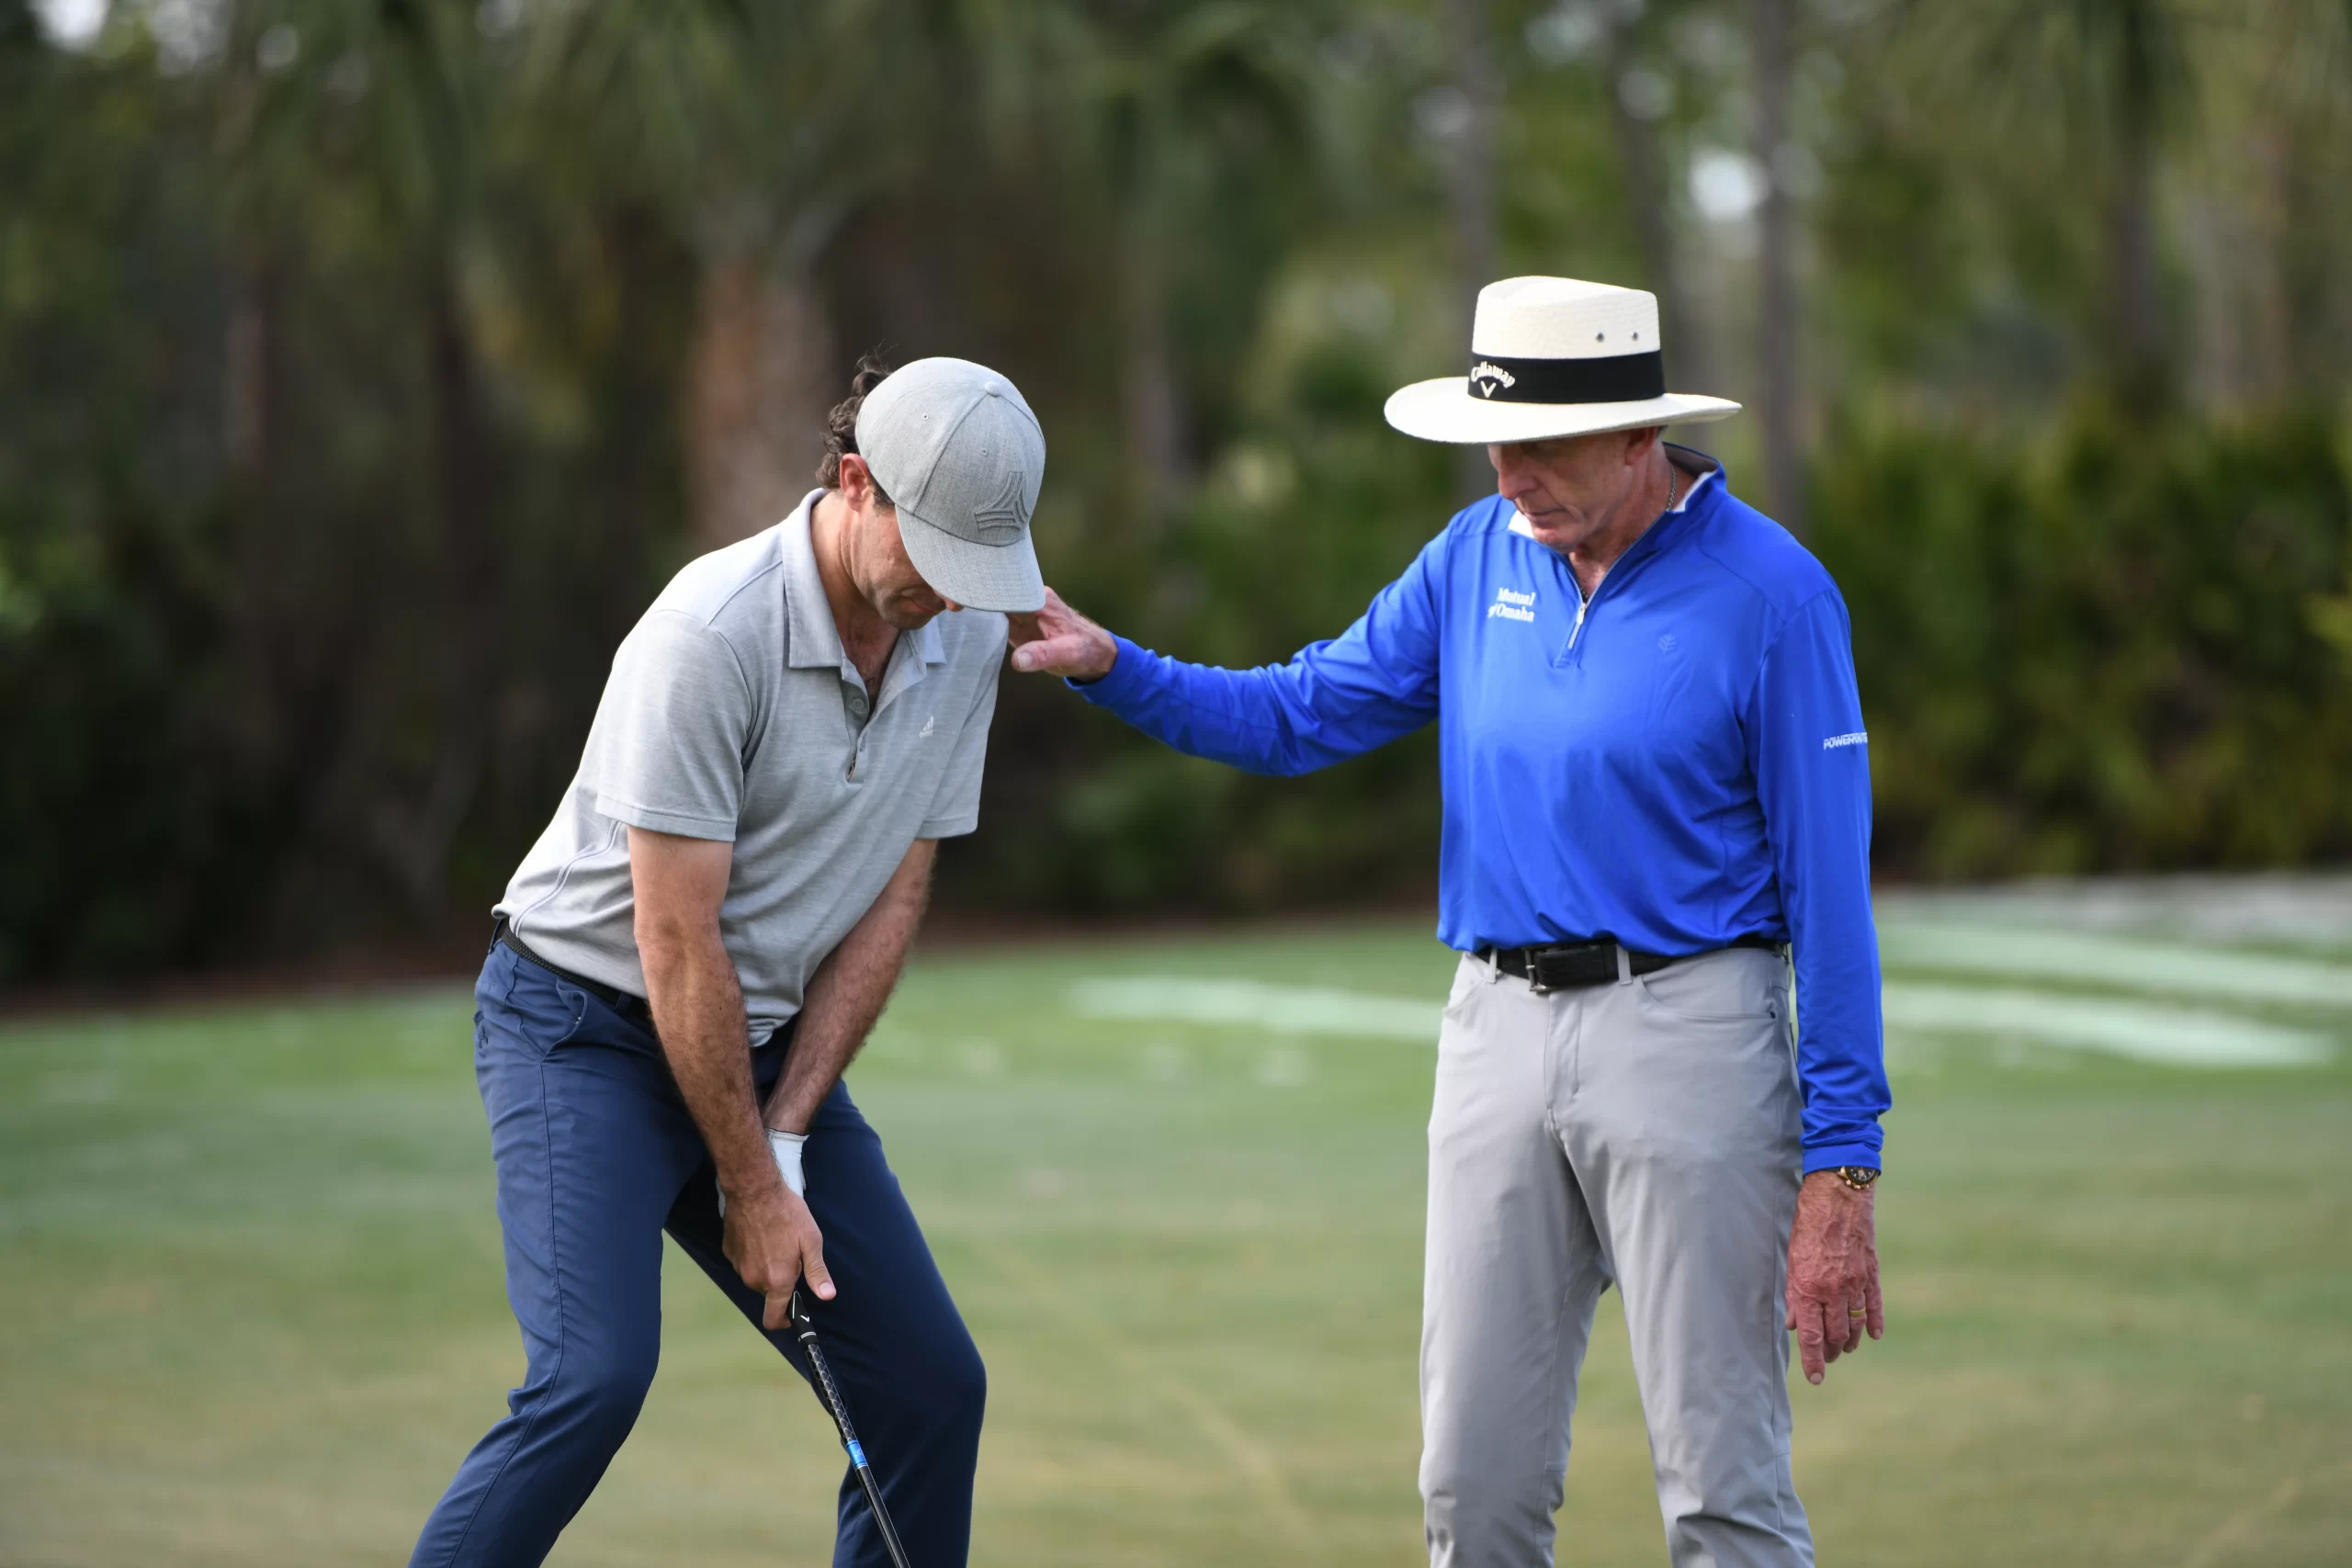 David Leadbetter with another golfer